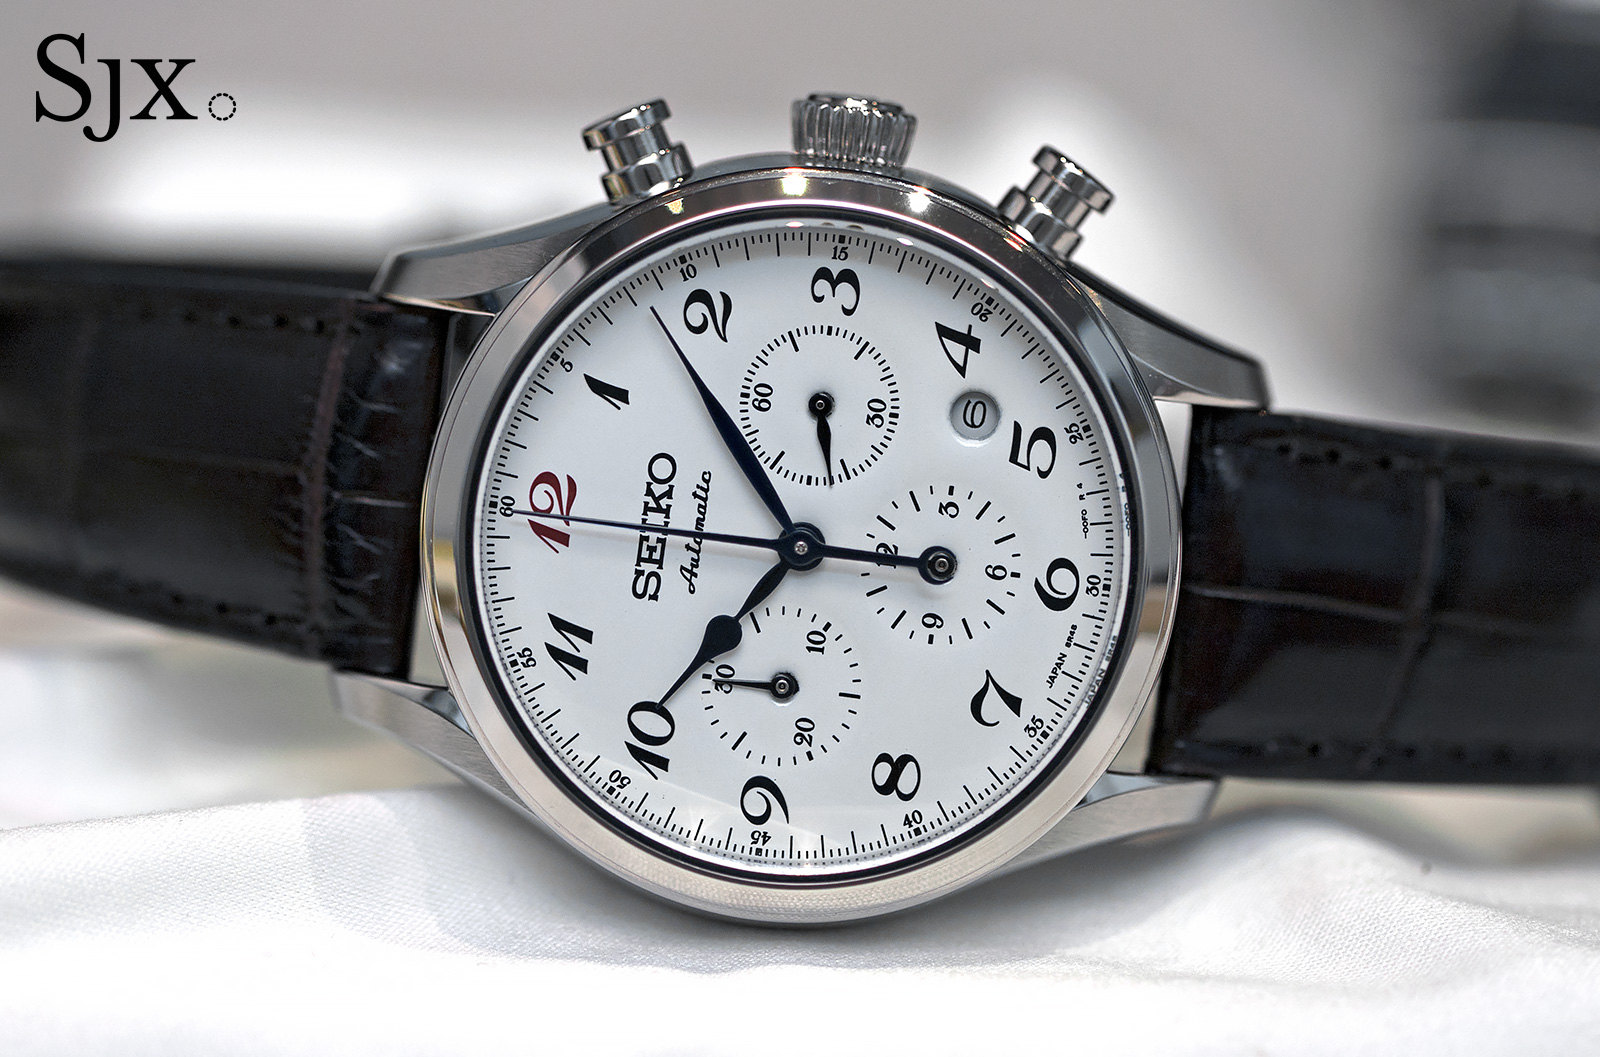 SODL): Seiko SARK001 - White Enamel Automatic -Limited Edition of 1000  Watch LE JDM | WatchUSeek Watch Forums